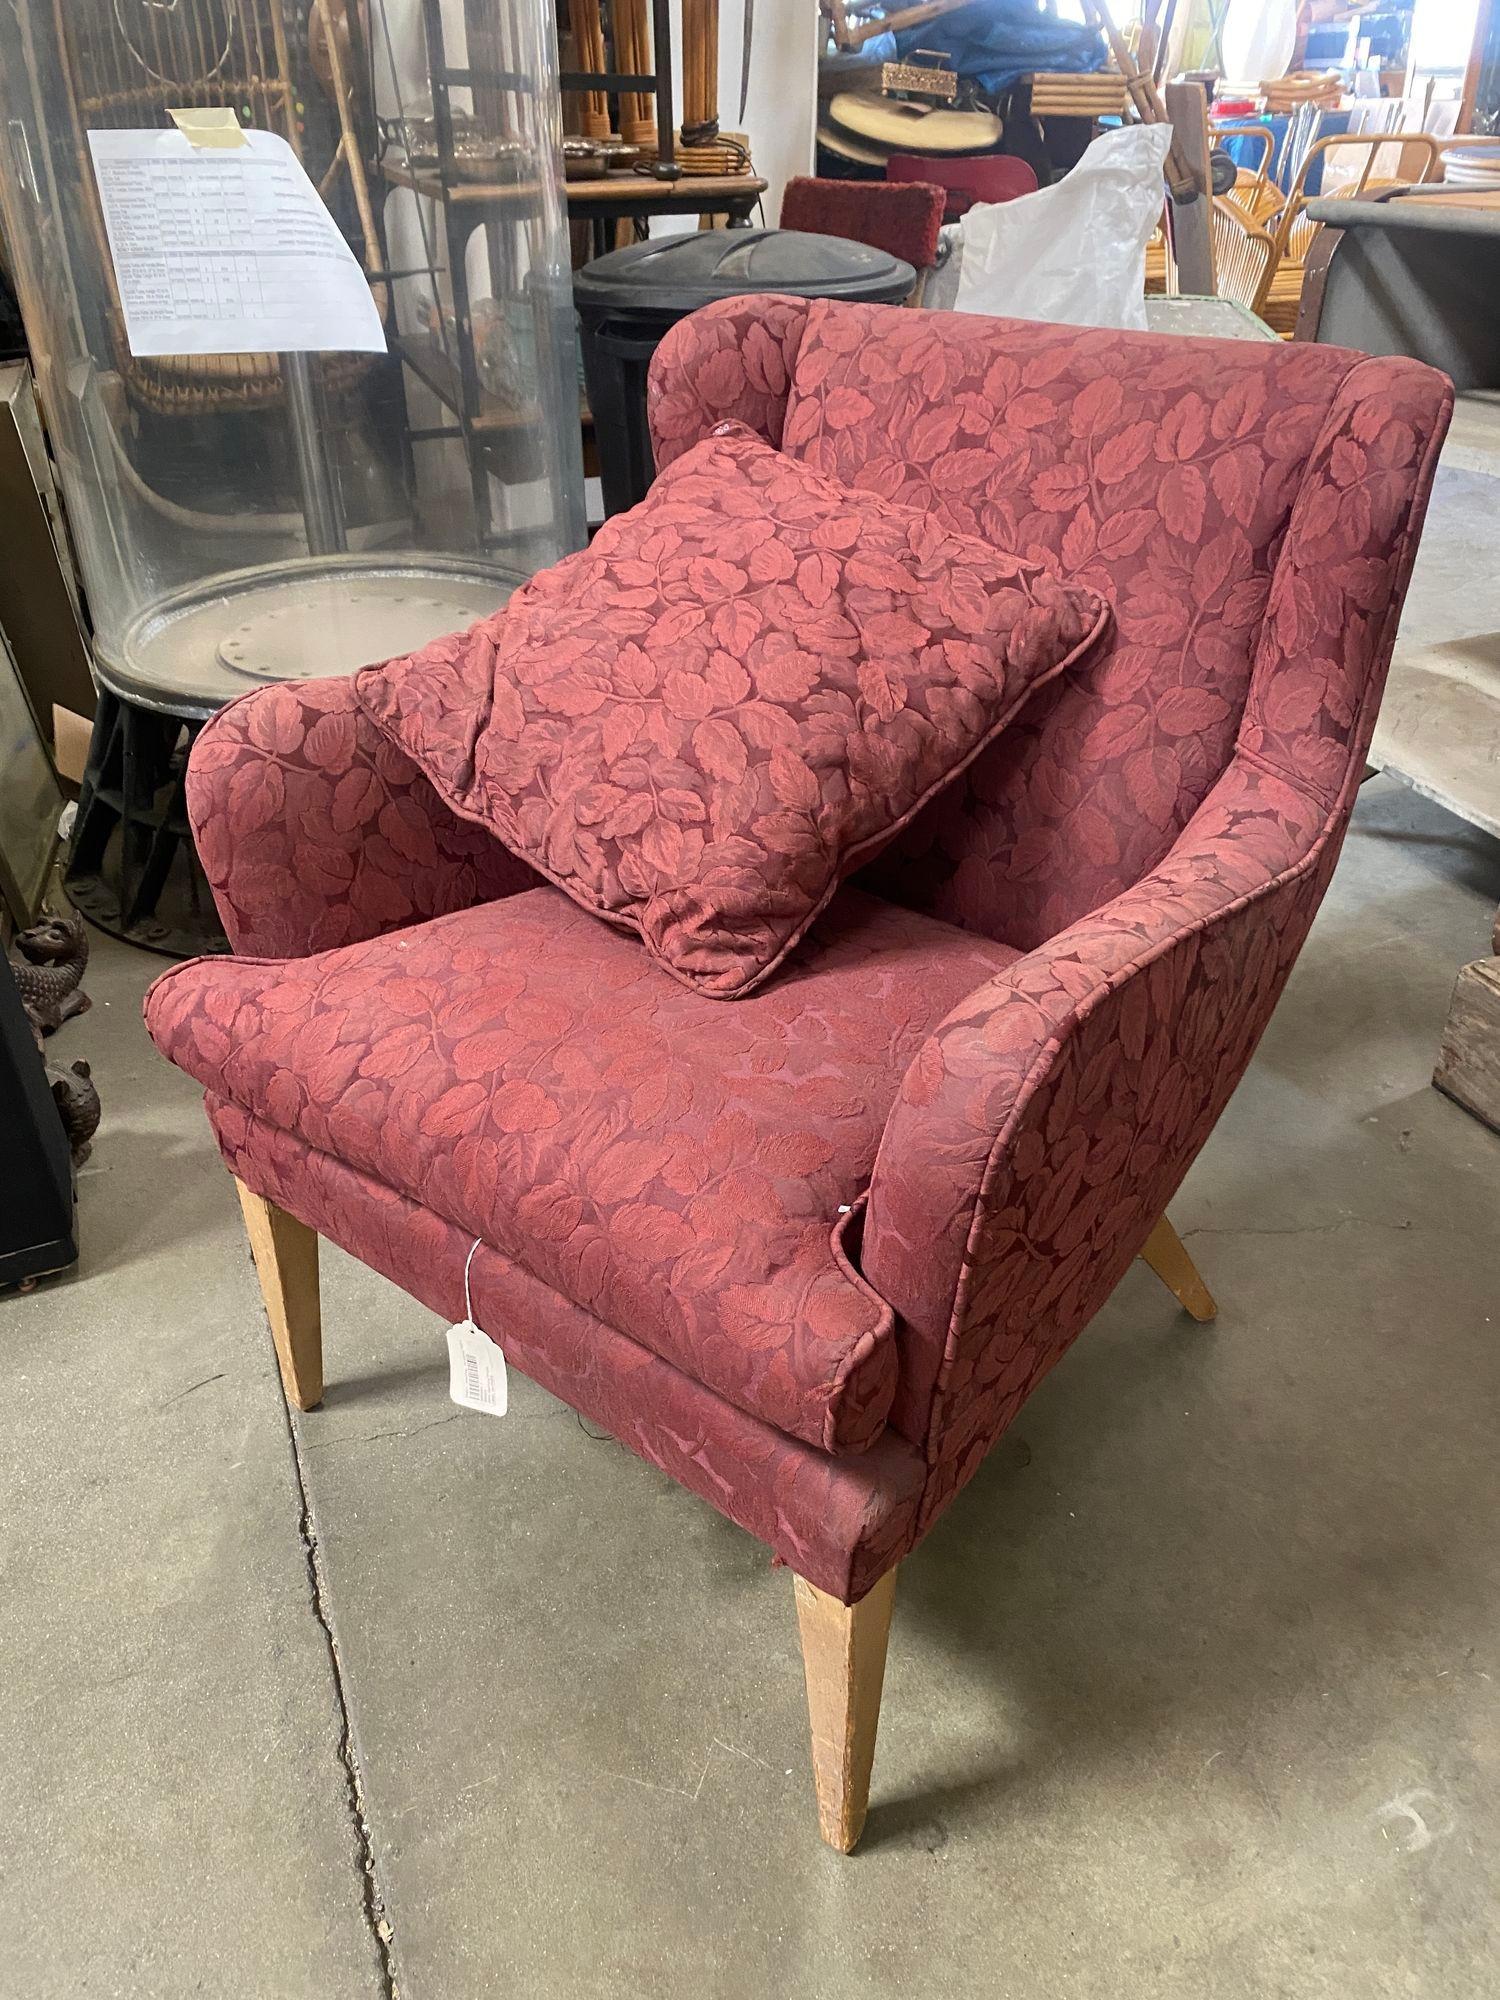 The Burgundy Wingback Mid-Century Chair is a spacious, stylish blend of vintage and modern design. With its rich burgundy upholstery, curved backrest, and tapered wooden legs, it complements any room.

Pair of 2.

Measures:
Chair H 31 in. x W 35 in.